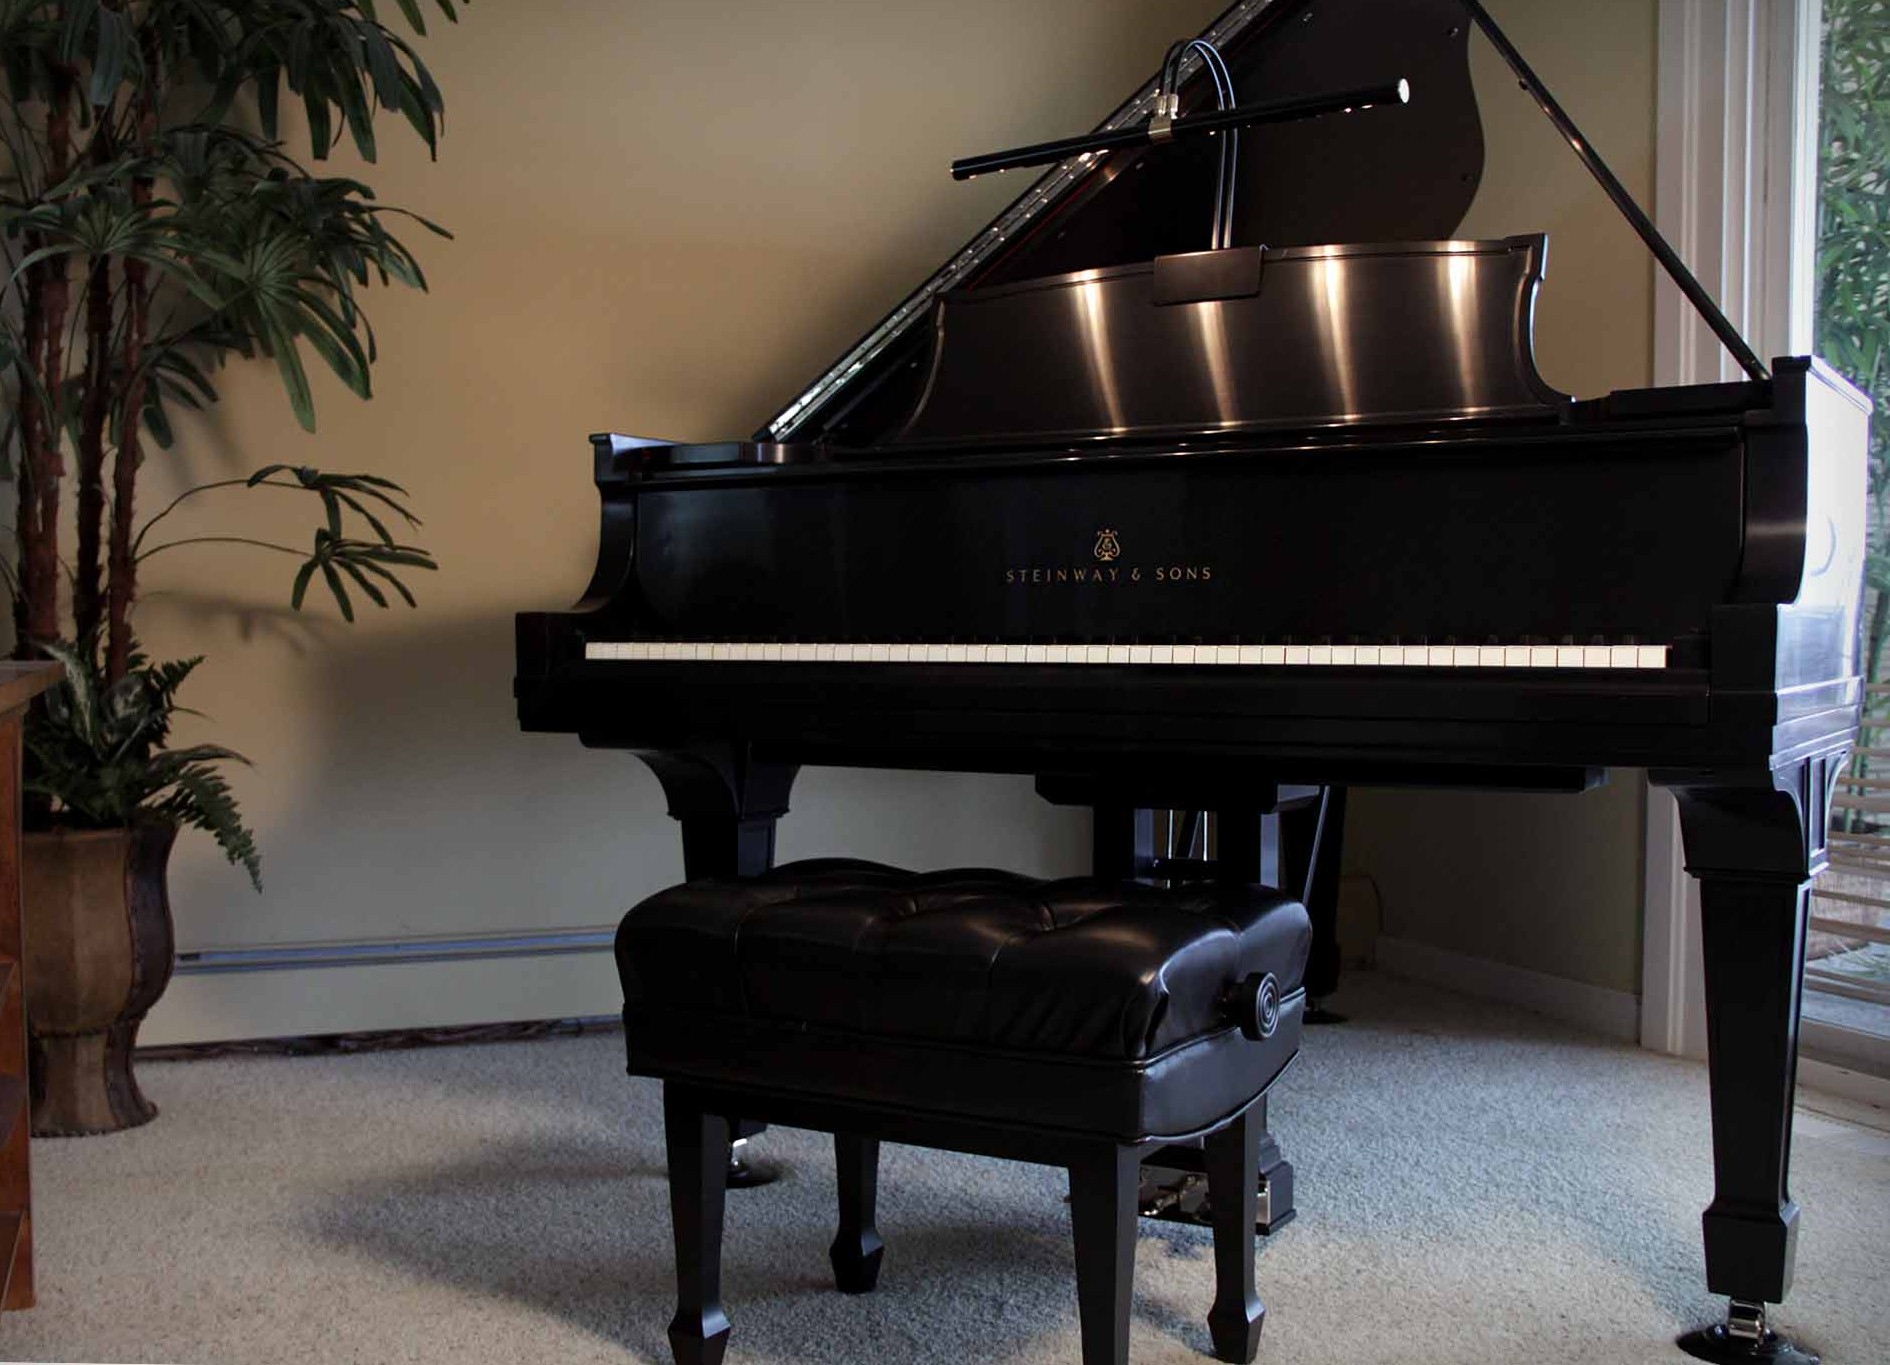 Steinway Model A Grand Piano - Vintage Steinway Piano